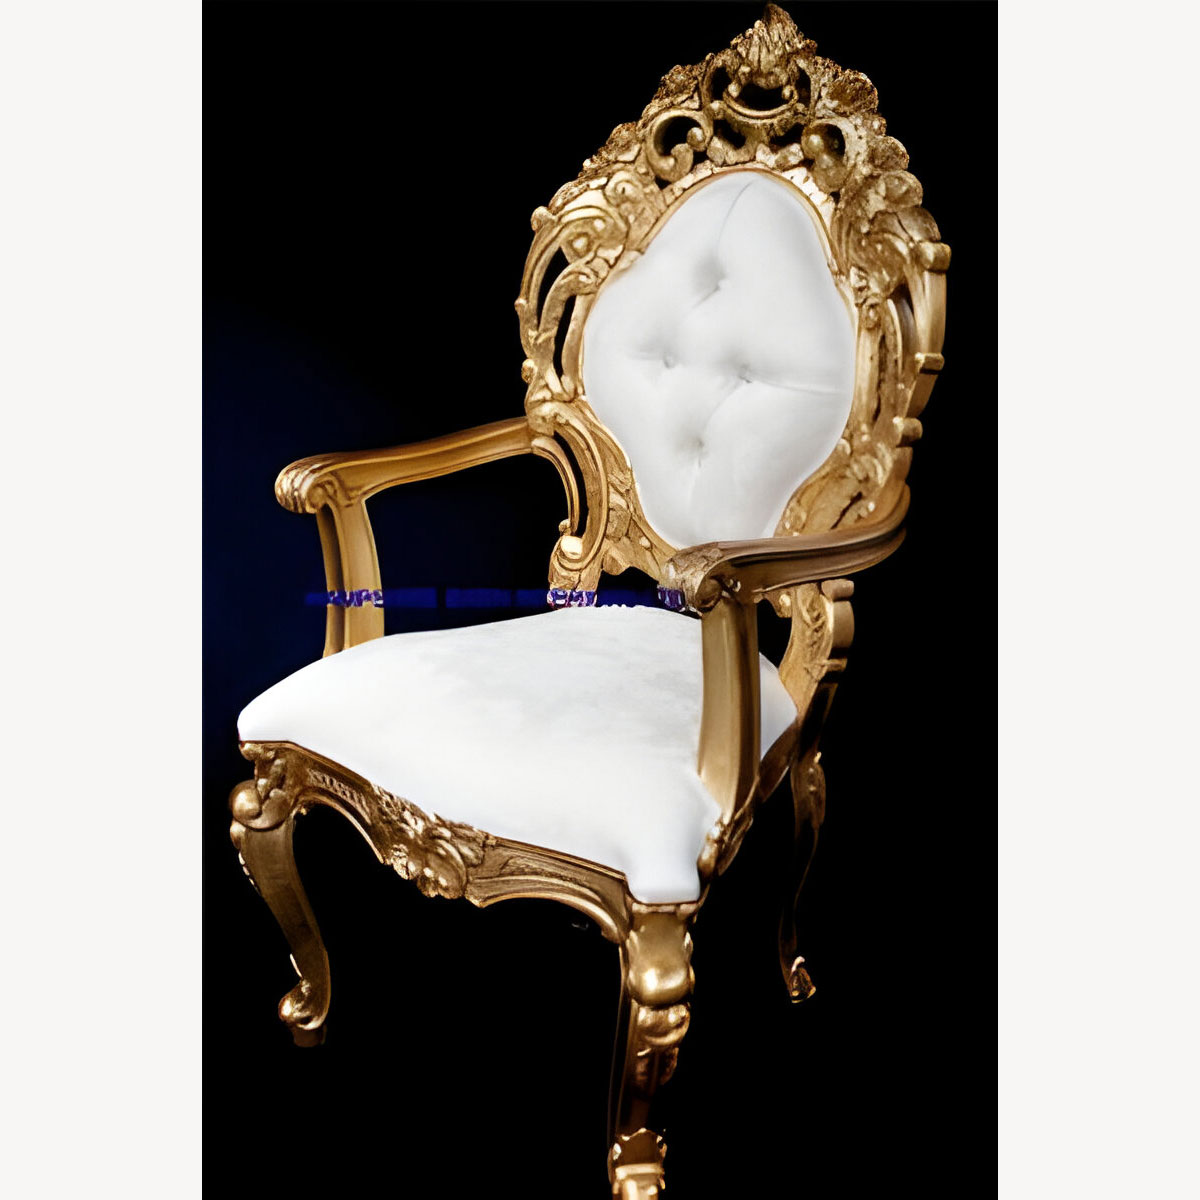 Large Mayfair Wedding Sofa In Gold Leaf Frame 3 Seater With Ivory Cream Damask With Two Matching Palace Throne Chairs Crystal Buttoning 3 - Hampshire Barn Interiors - Large Mayfair Wedding Sofa In Gold Leaf Frame 3 Seater With Ivory Cream Damask With Two Matching Palace Throne Chairs Crystal Buttoning -